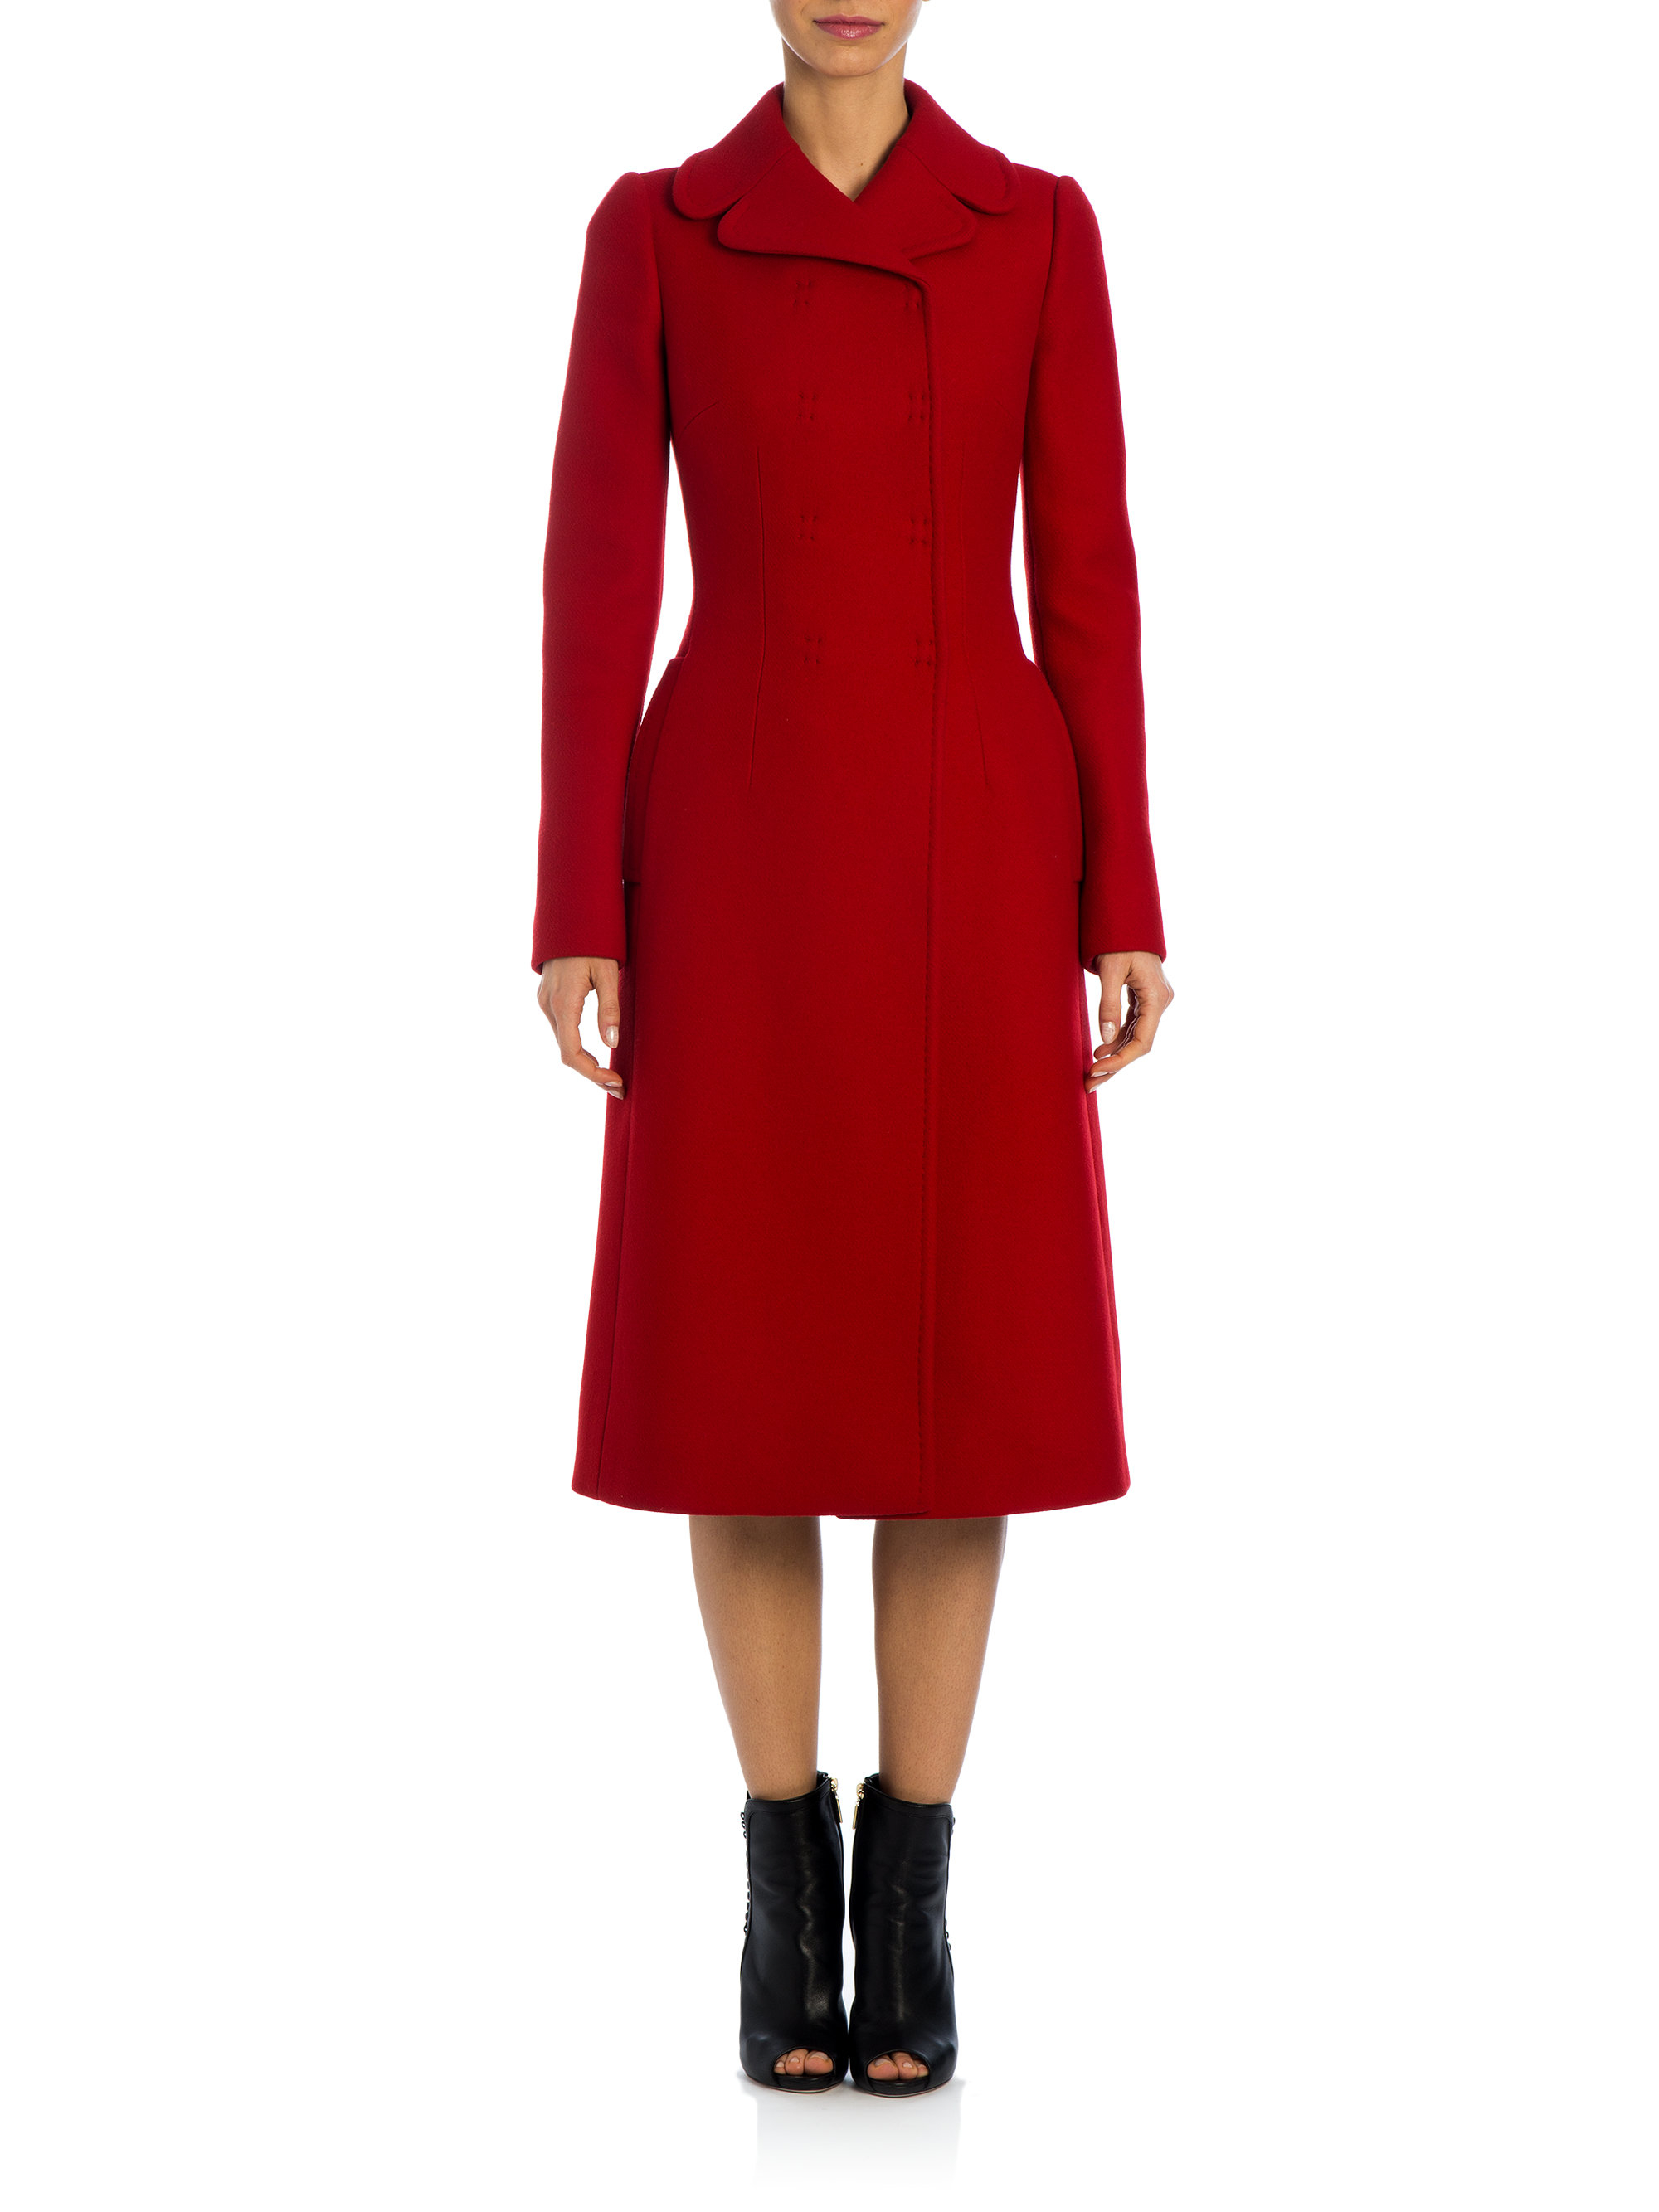 Dolce And Gabbana Wool Coat Online Discounted, 63% OFF |  public-locksmith.com